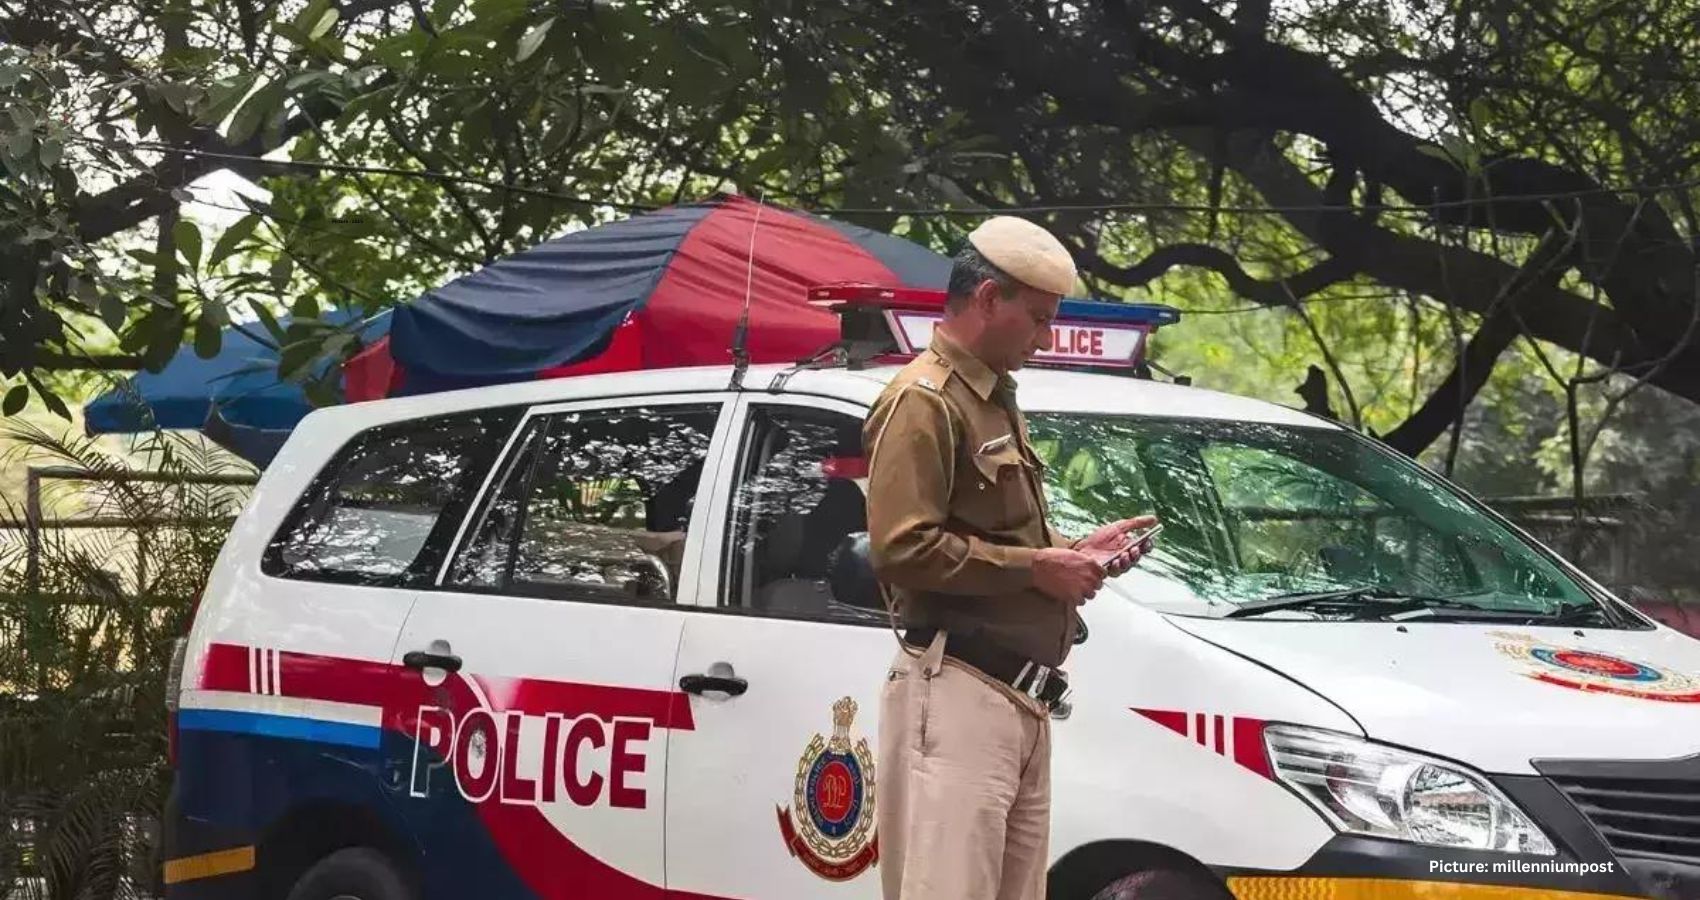 Delhi Police Ramp Up Security Amidst Threats to Parliament’s Foundation on Anniversary of 2001 Attack